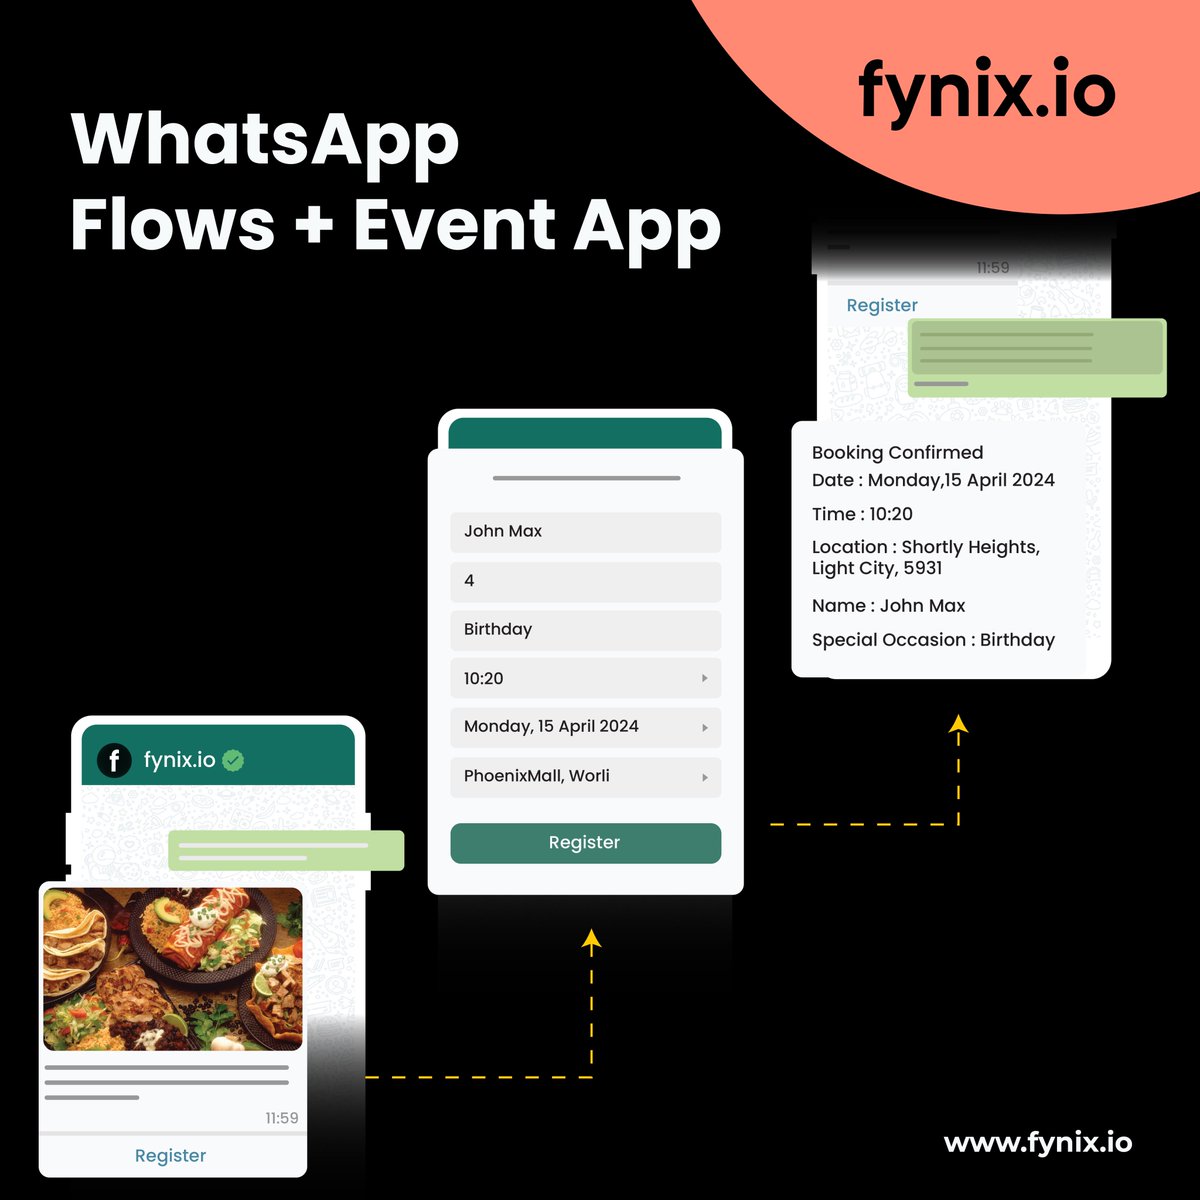 Planning made easy with Fynix! 🎉 Book your party, reserve a table, or schedule any event effortlessly through WhatsApp Flows and the Fynix event App.
#FynixBookings #WhatsAppFlows #EventBooking #PartyPlanning #TableReservation #DigitalBookings #FynixEventApp #ConvenientBooking